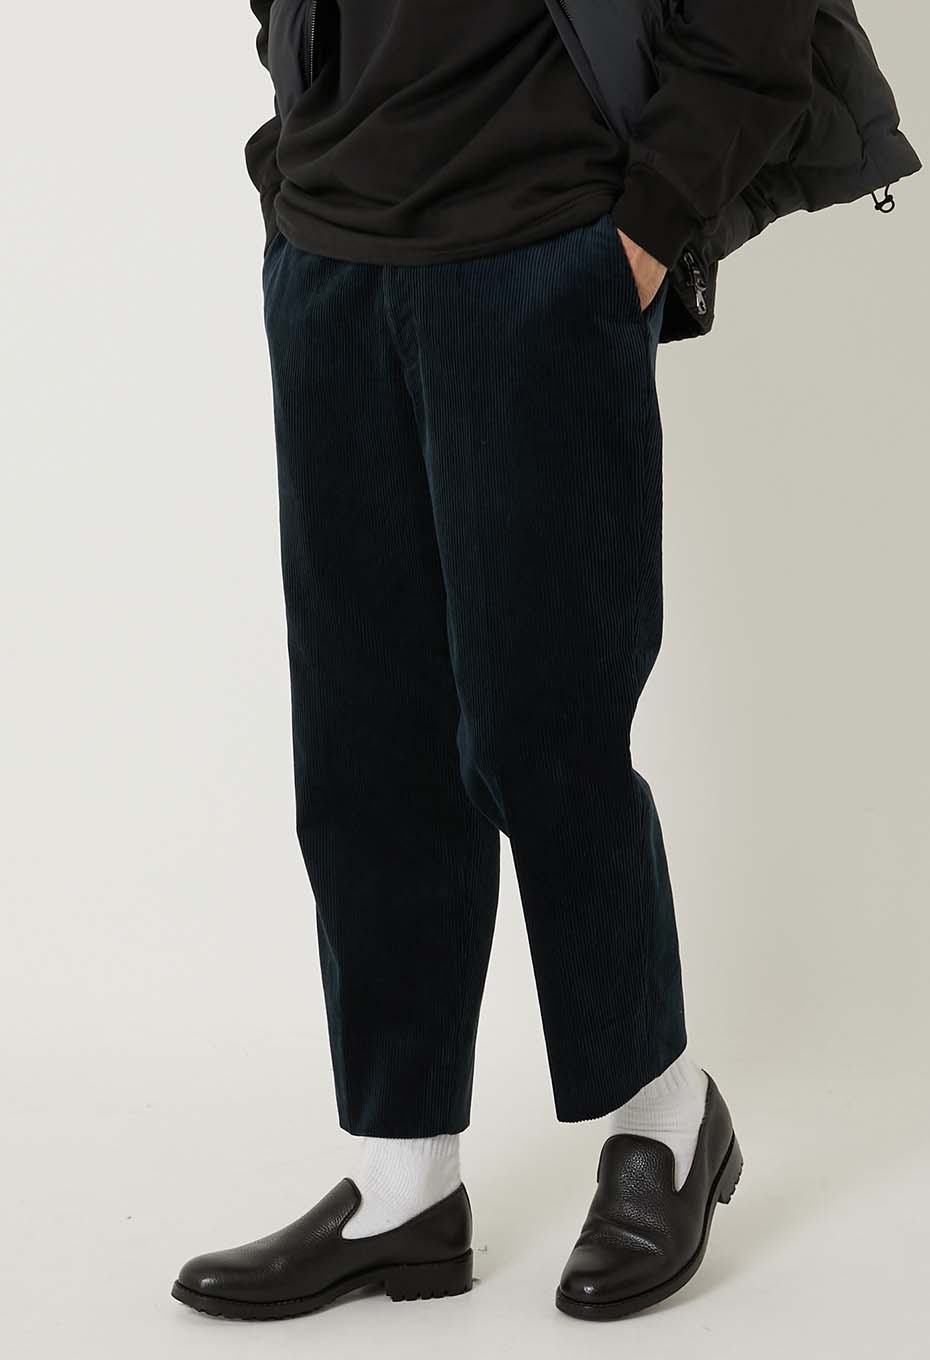 ENDS AND MEANS | Trousers | ENDS AND MEANS Grandpa Corduroy Trousers